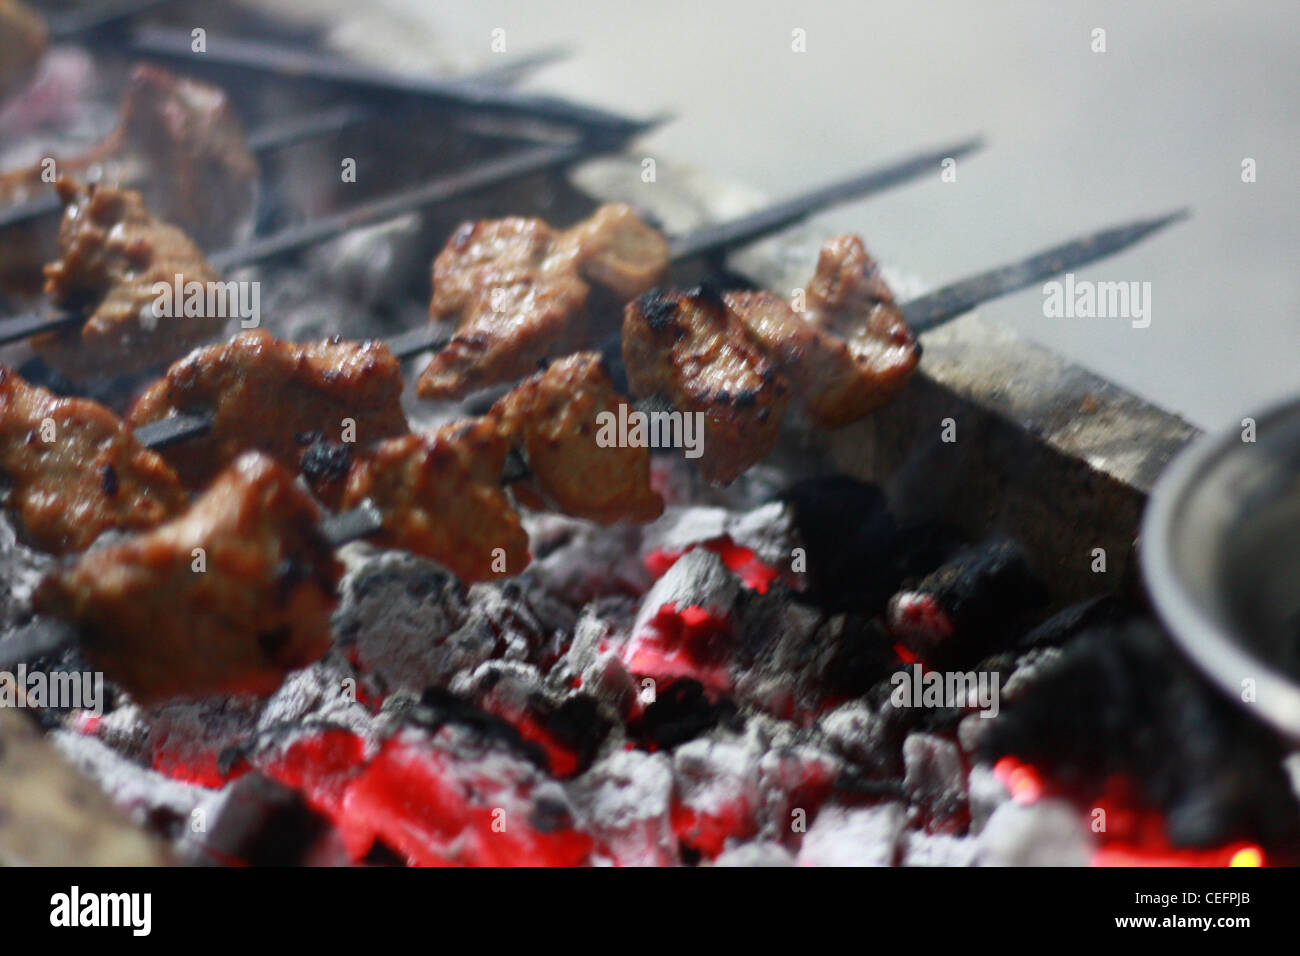 BBQ night out, cooking meat on coal and skewers Stock Photo